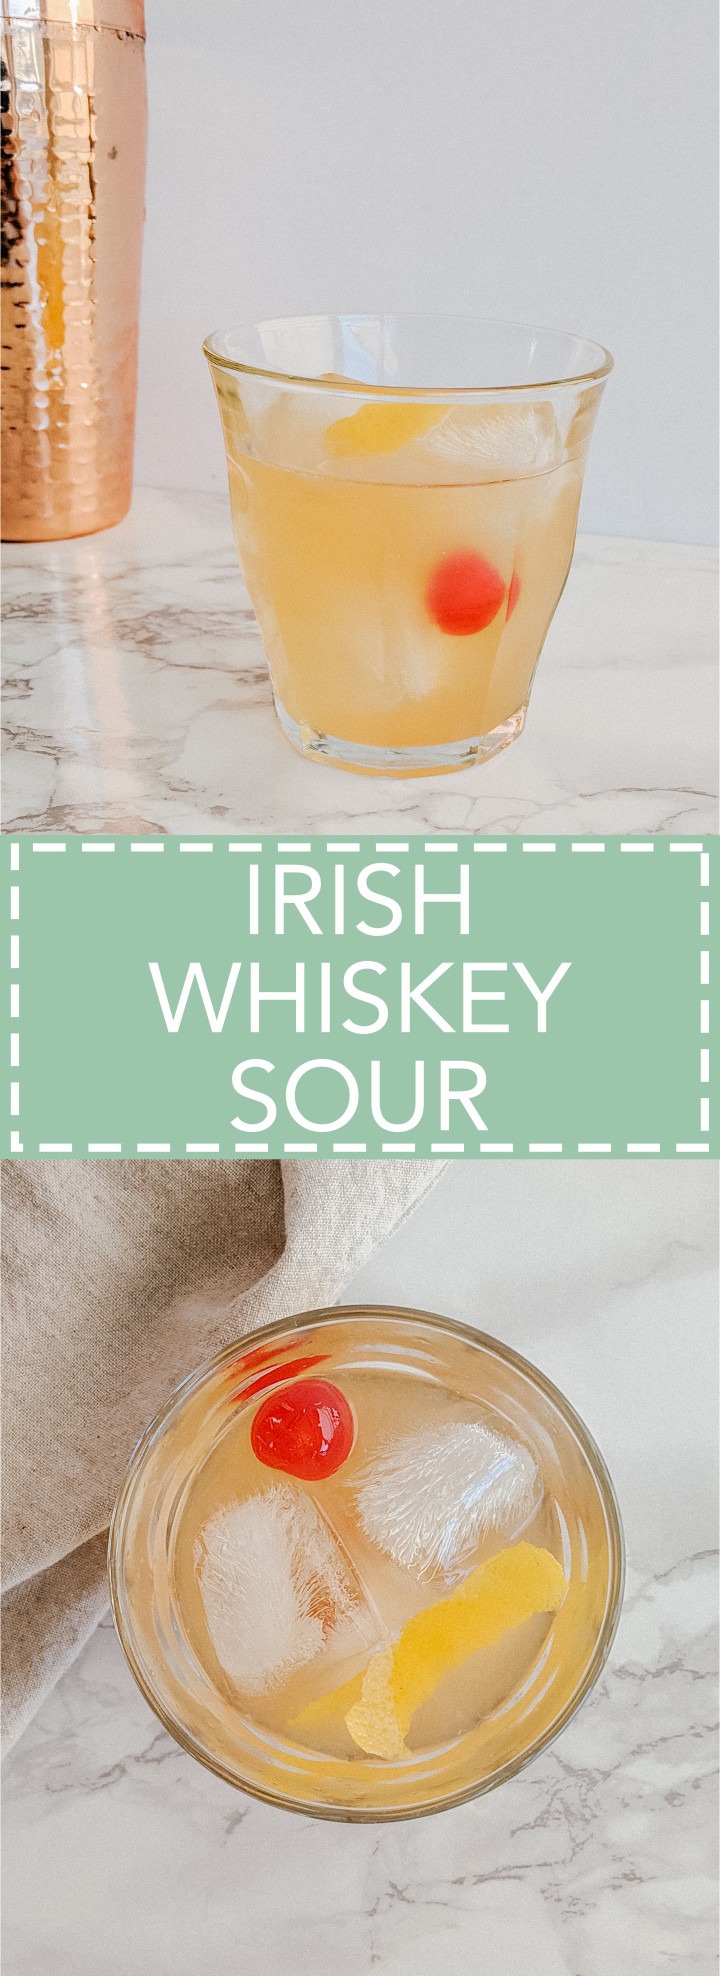 Irish Whiskey Sour - A twist on a Classic for St. Patrick's Day!